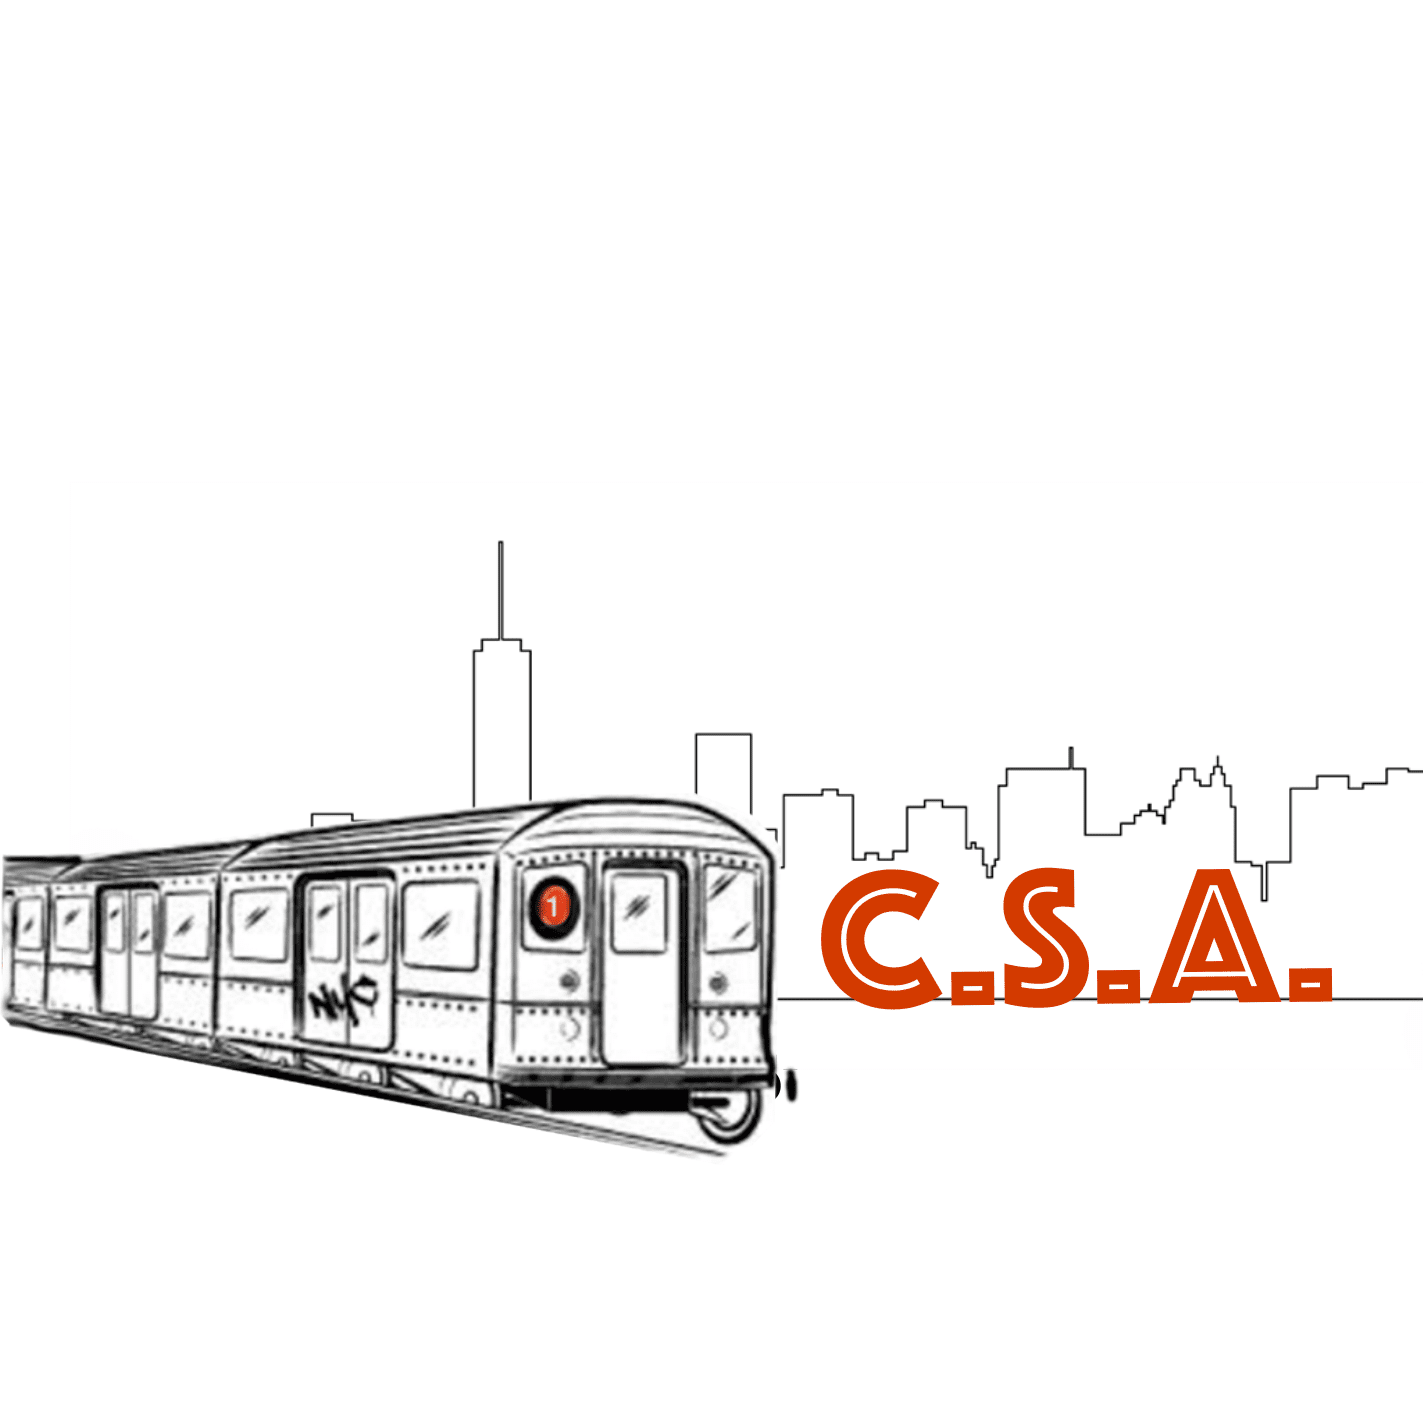 Drawing of number one subway car with C.S.A in red lettering in front of New York City skyline